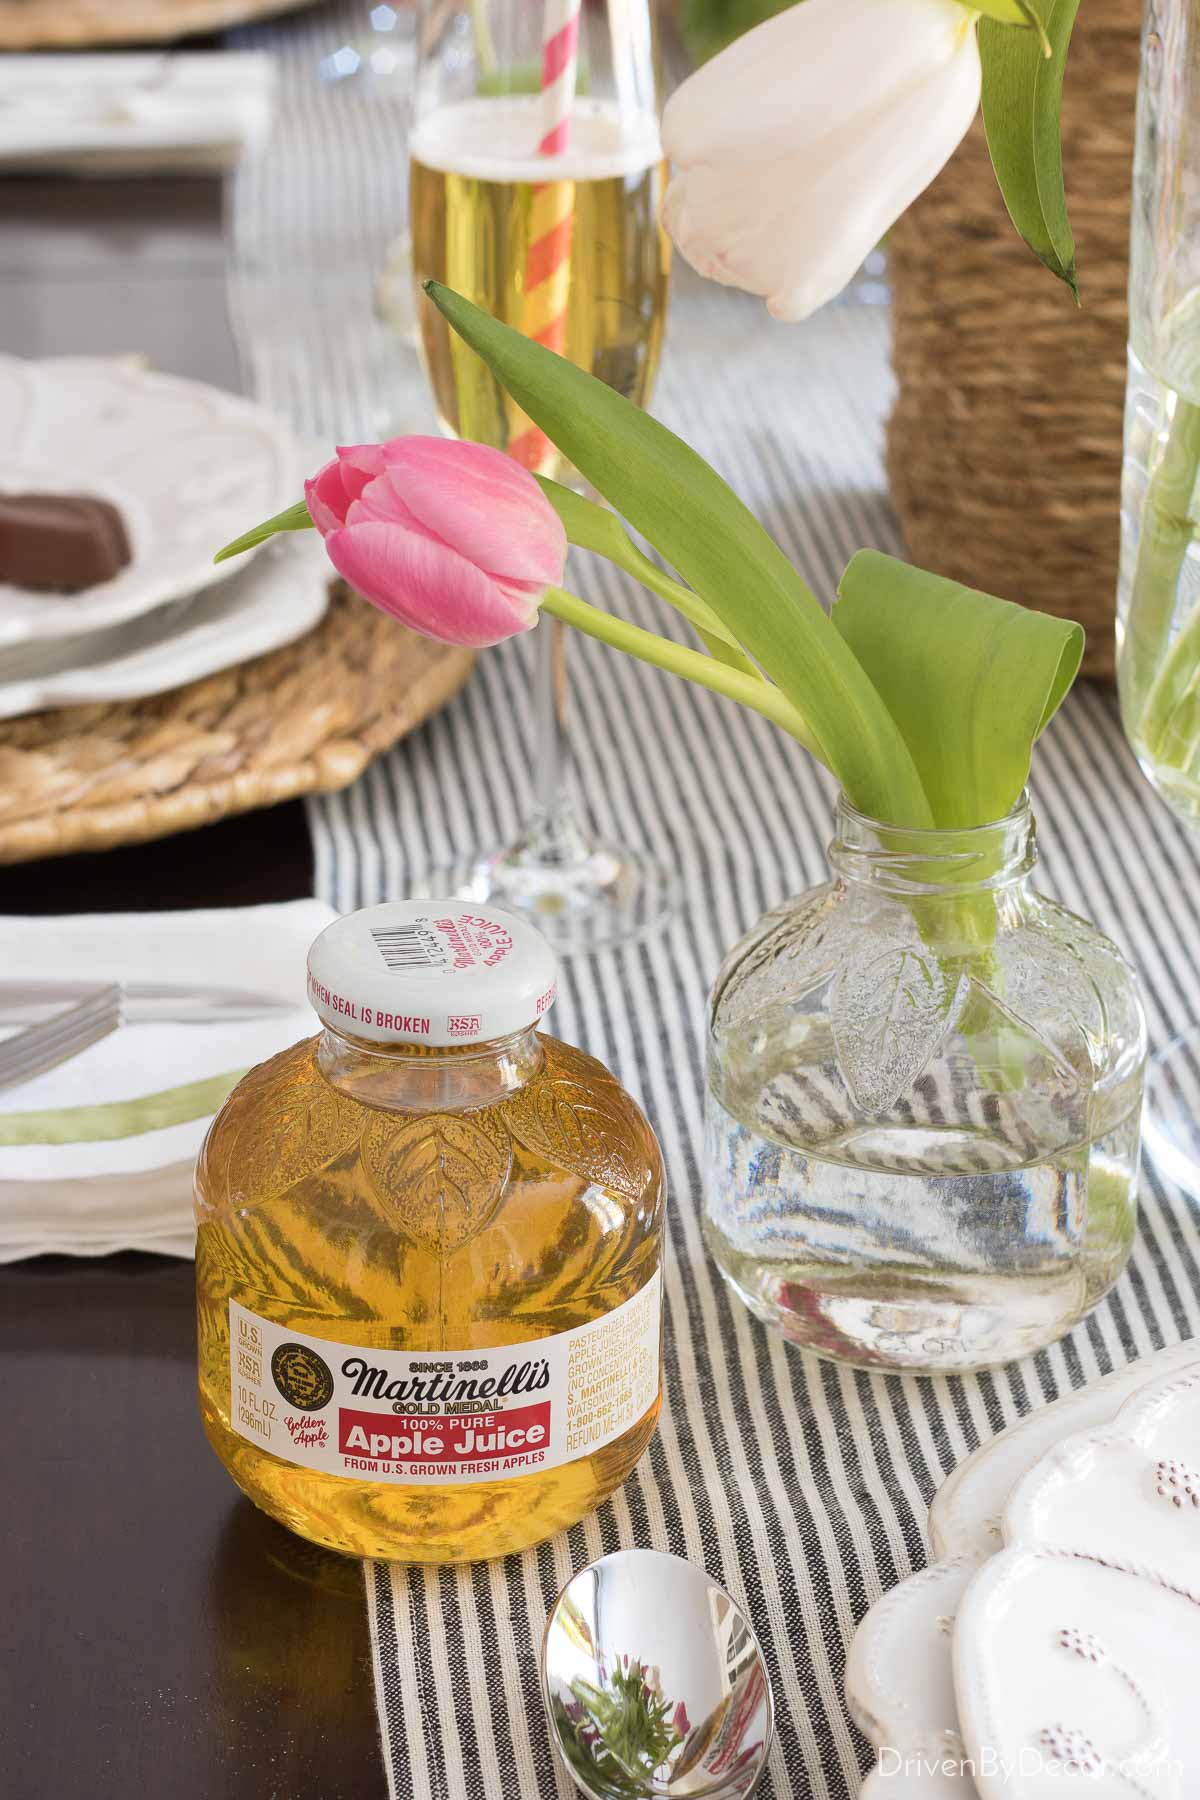 Small apple juice bottles turned into vases